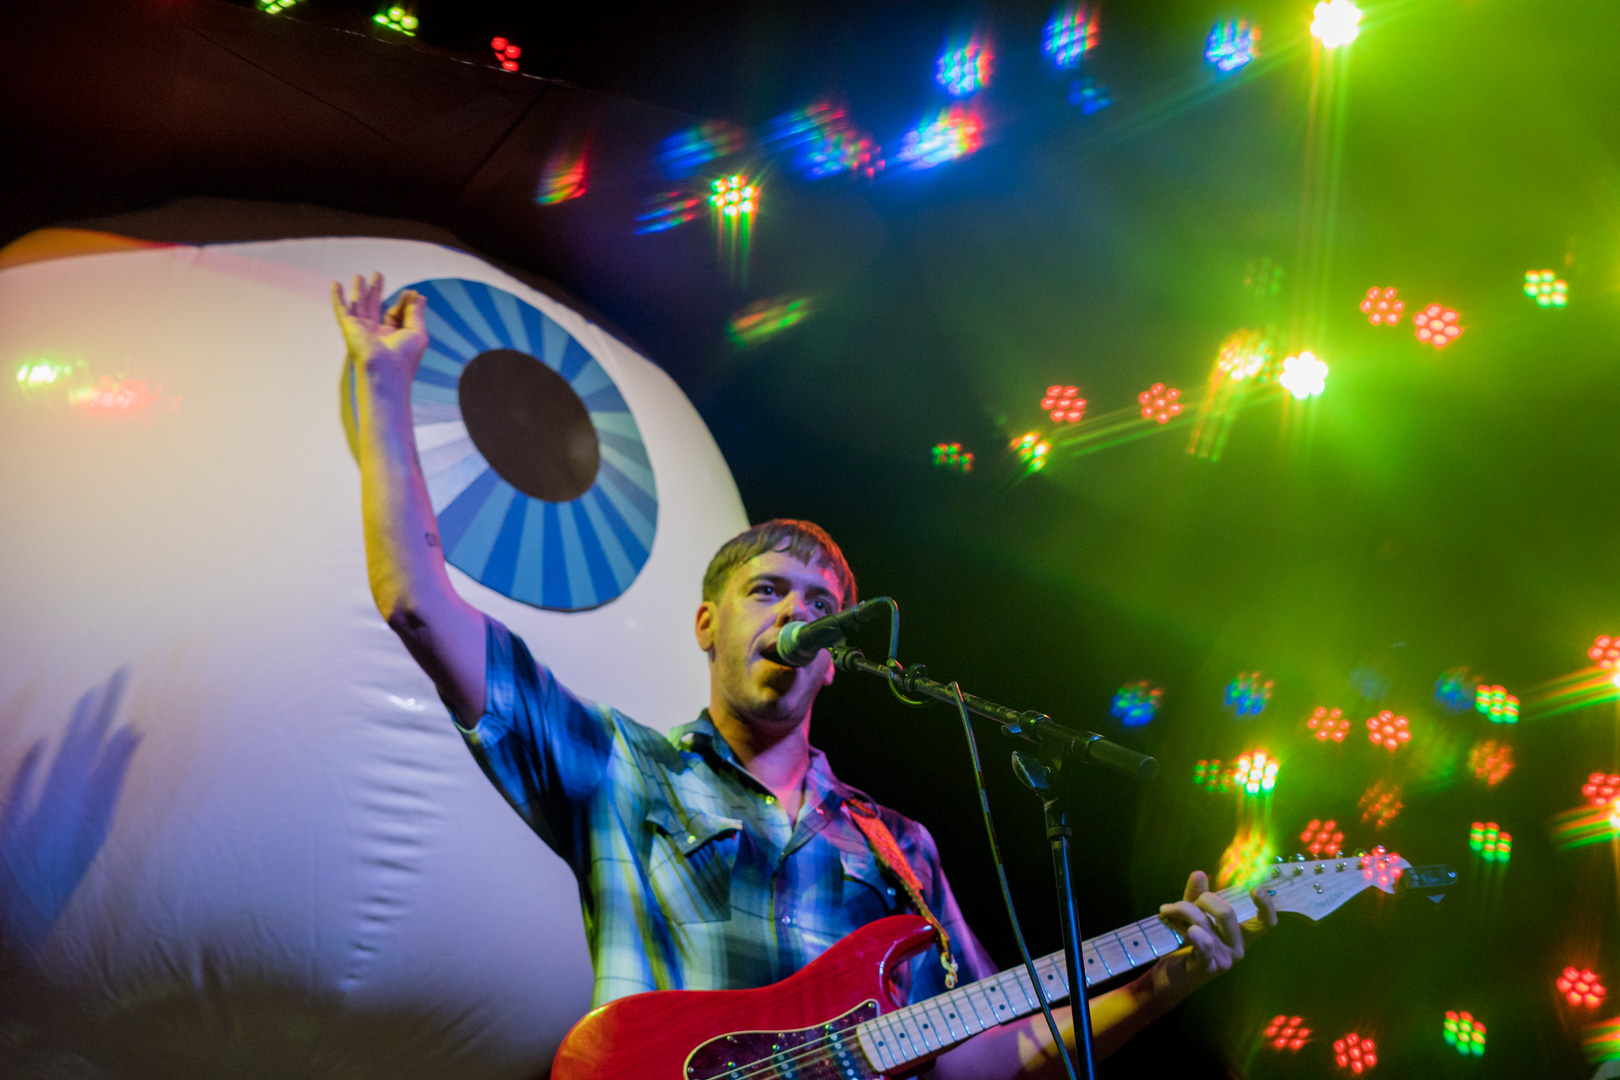 A man on stage playing guitar holds up his hand while a giant eyeball wearing a cowboy hat hangs from the ceiling behind him.